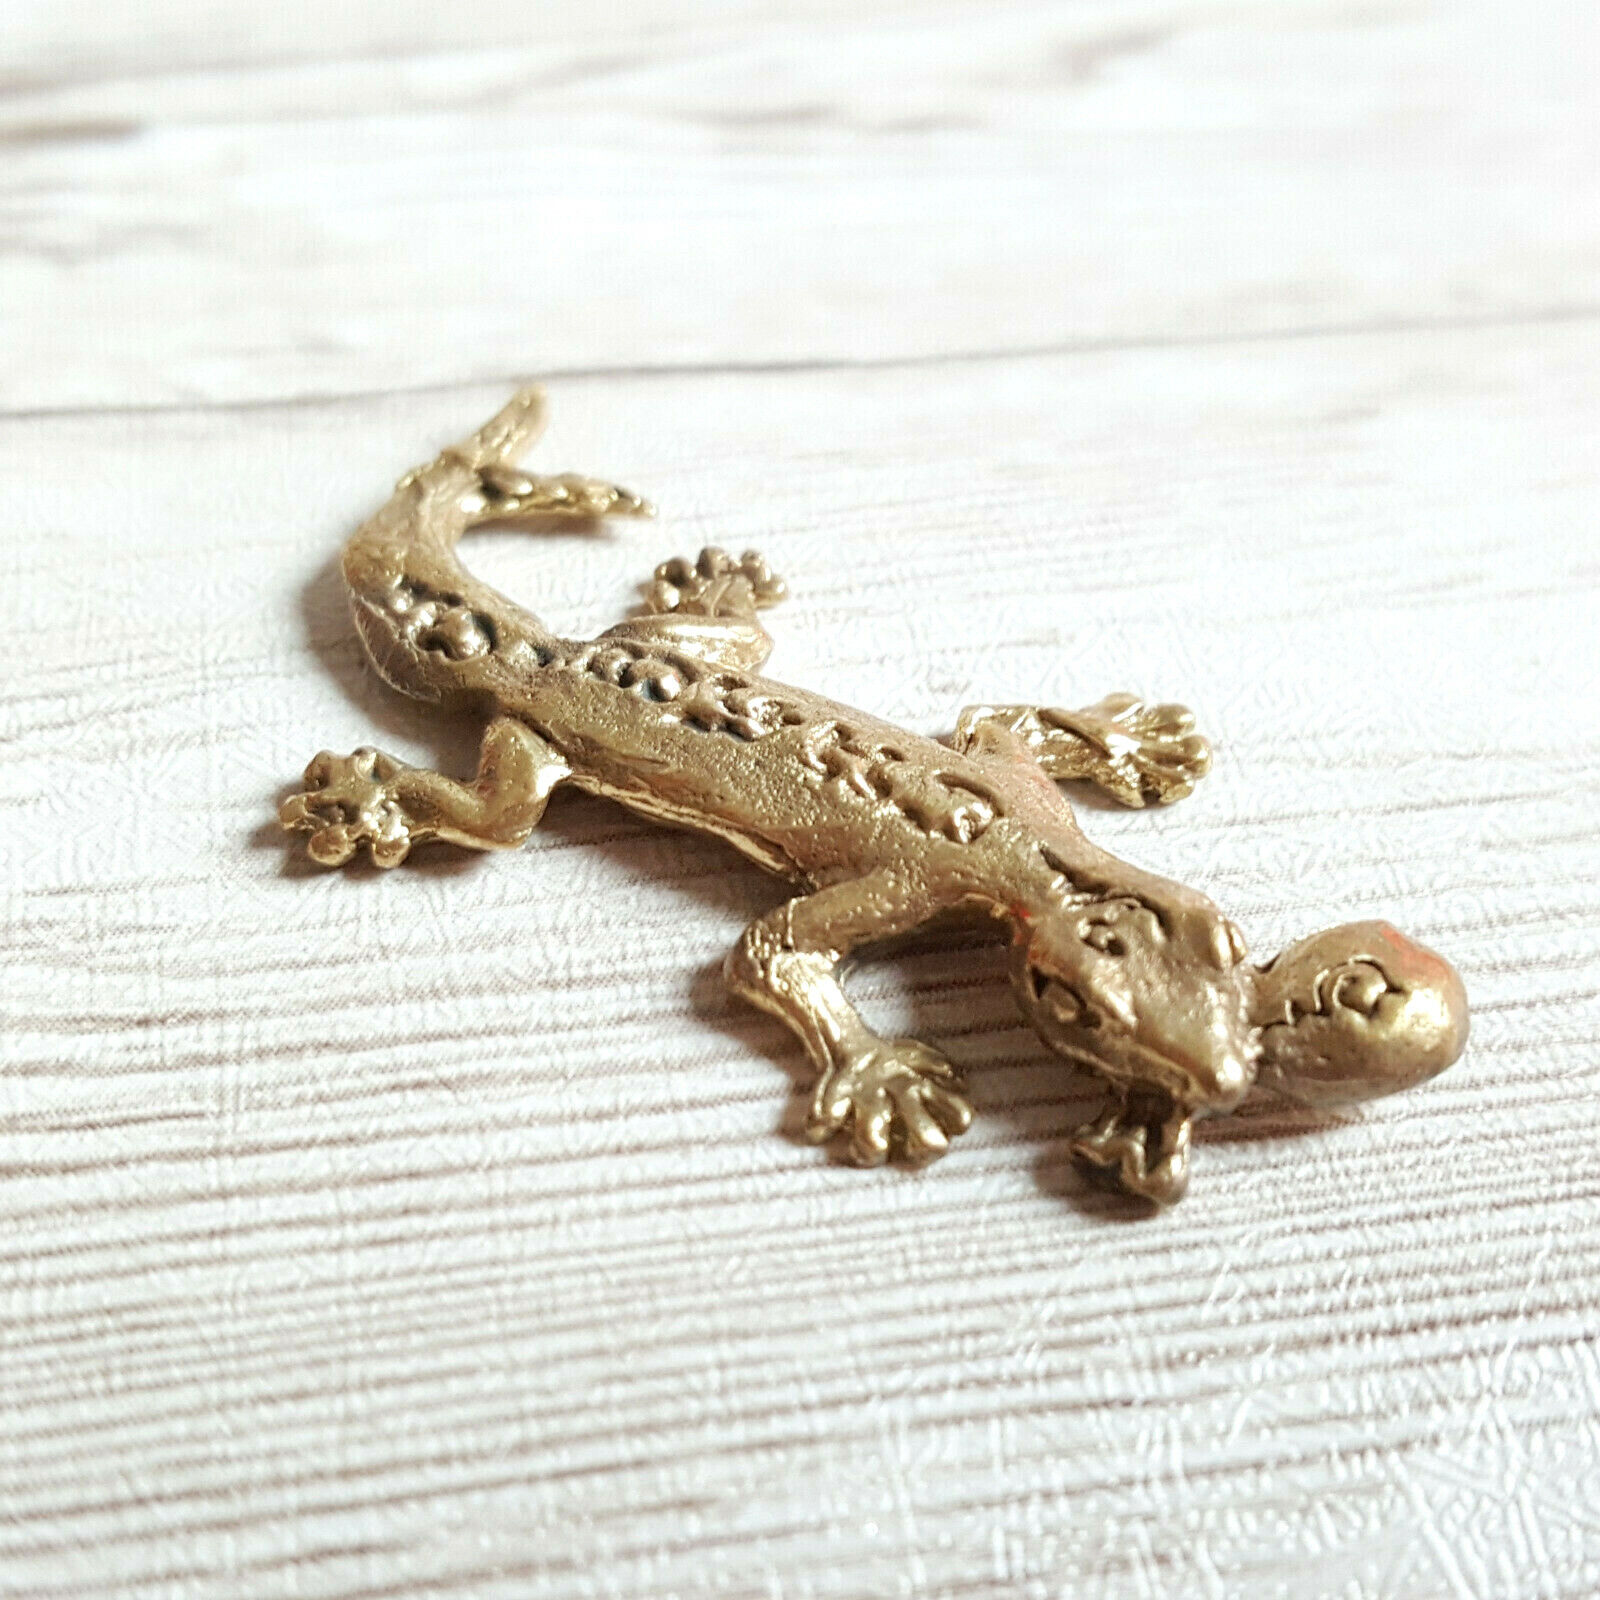 Gold Gecko Lizard Figurine Two Tails Reptile Bite Money Wealth Gamble Win Carry